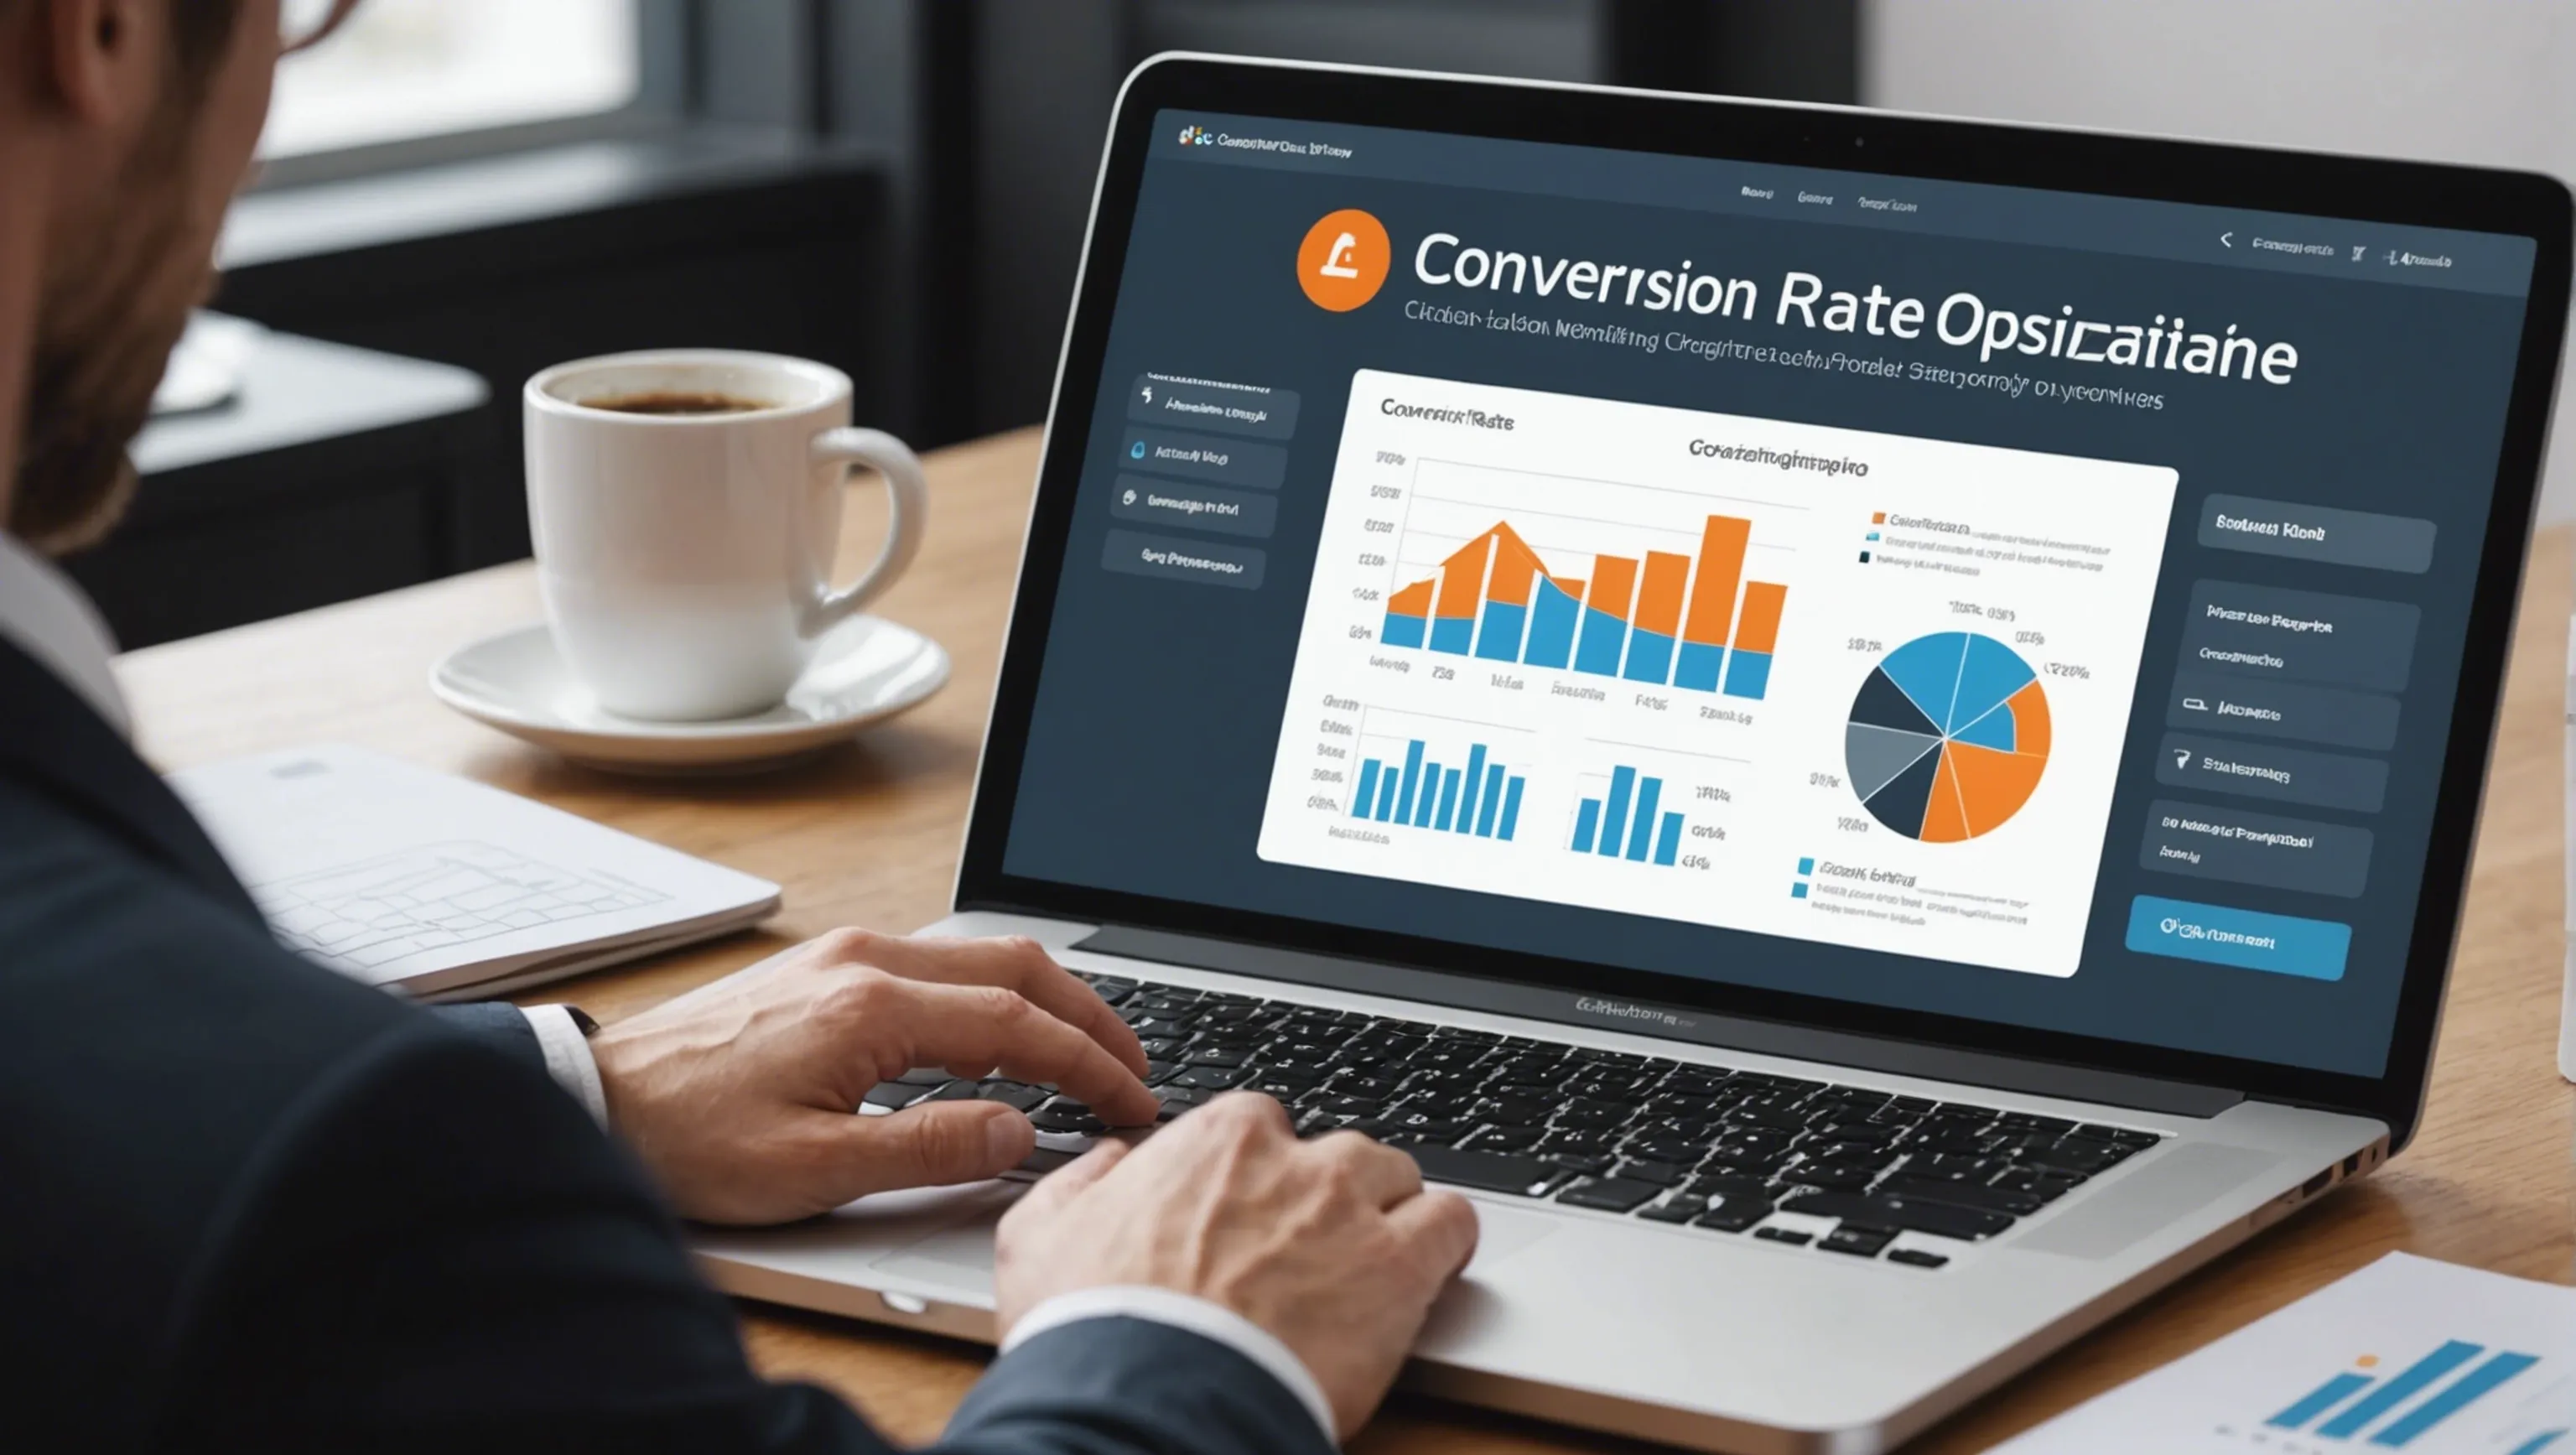 Conversion Rate Optimization for marketing professionals